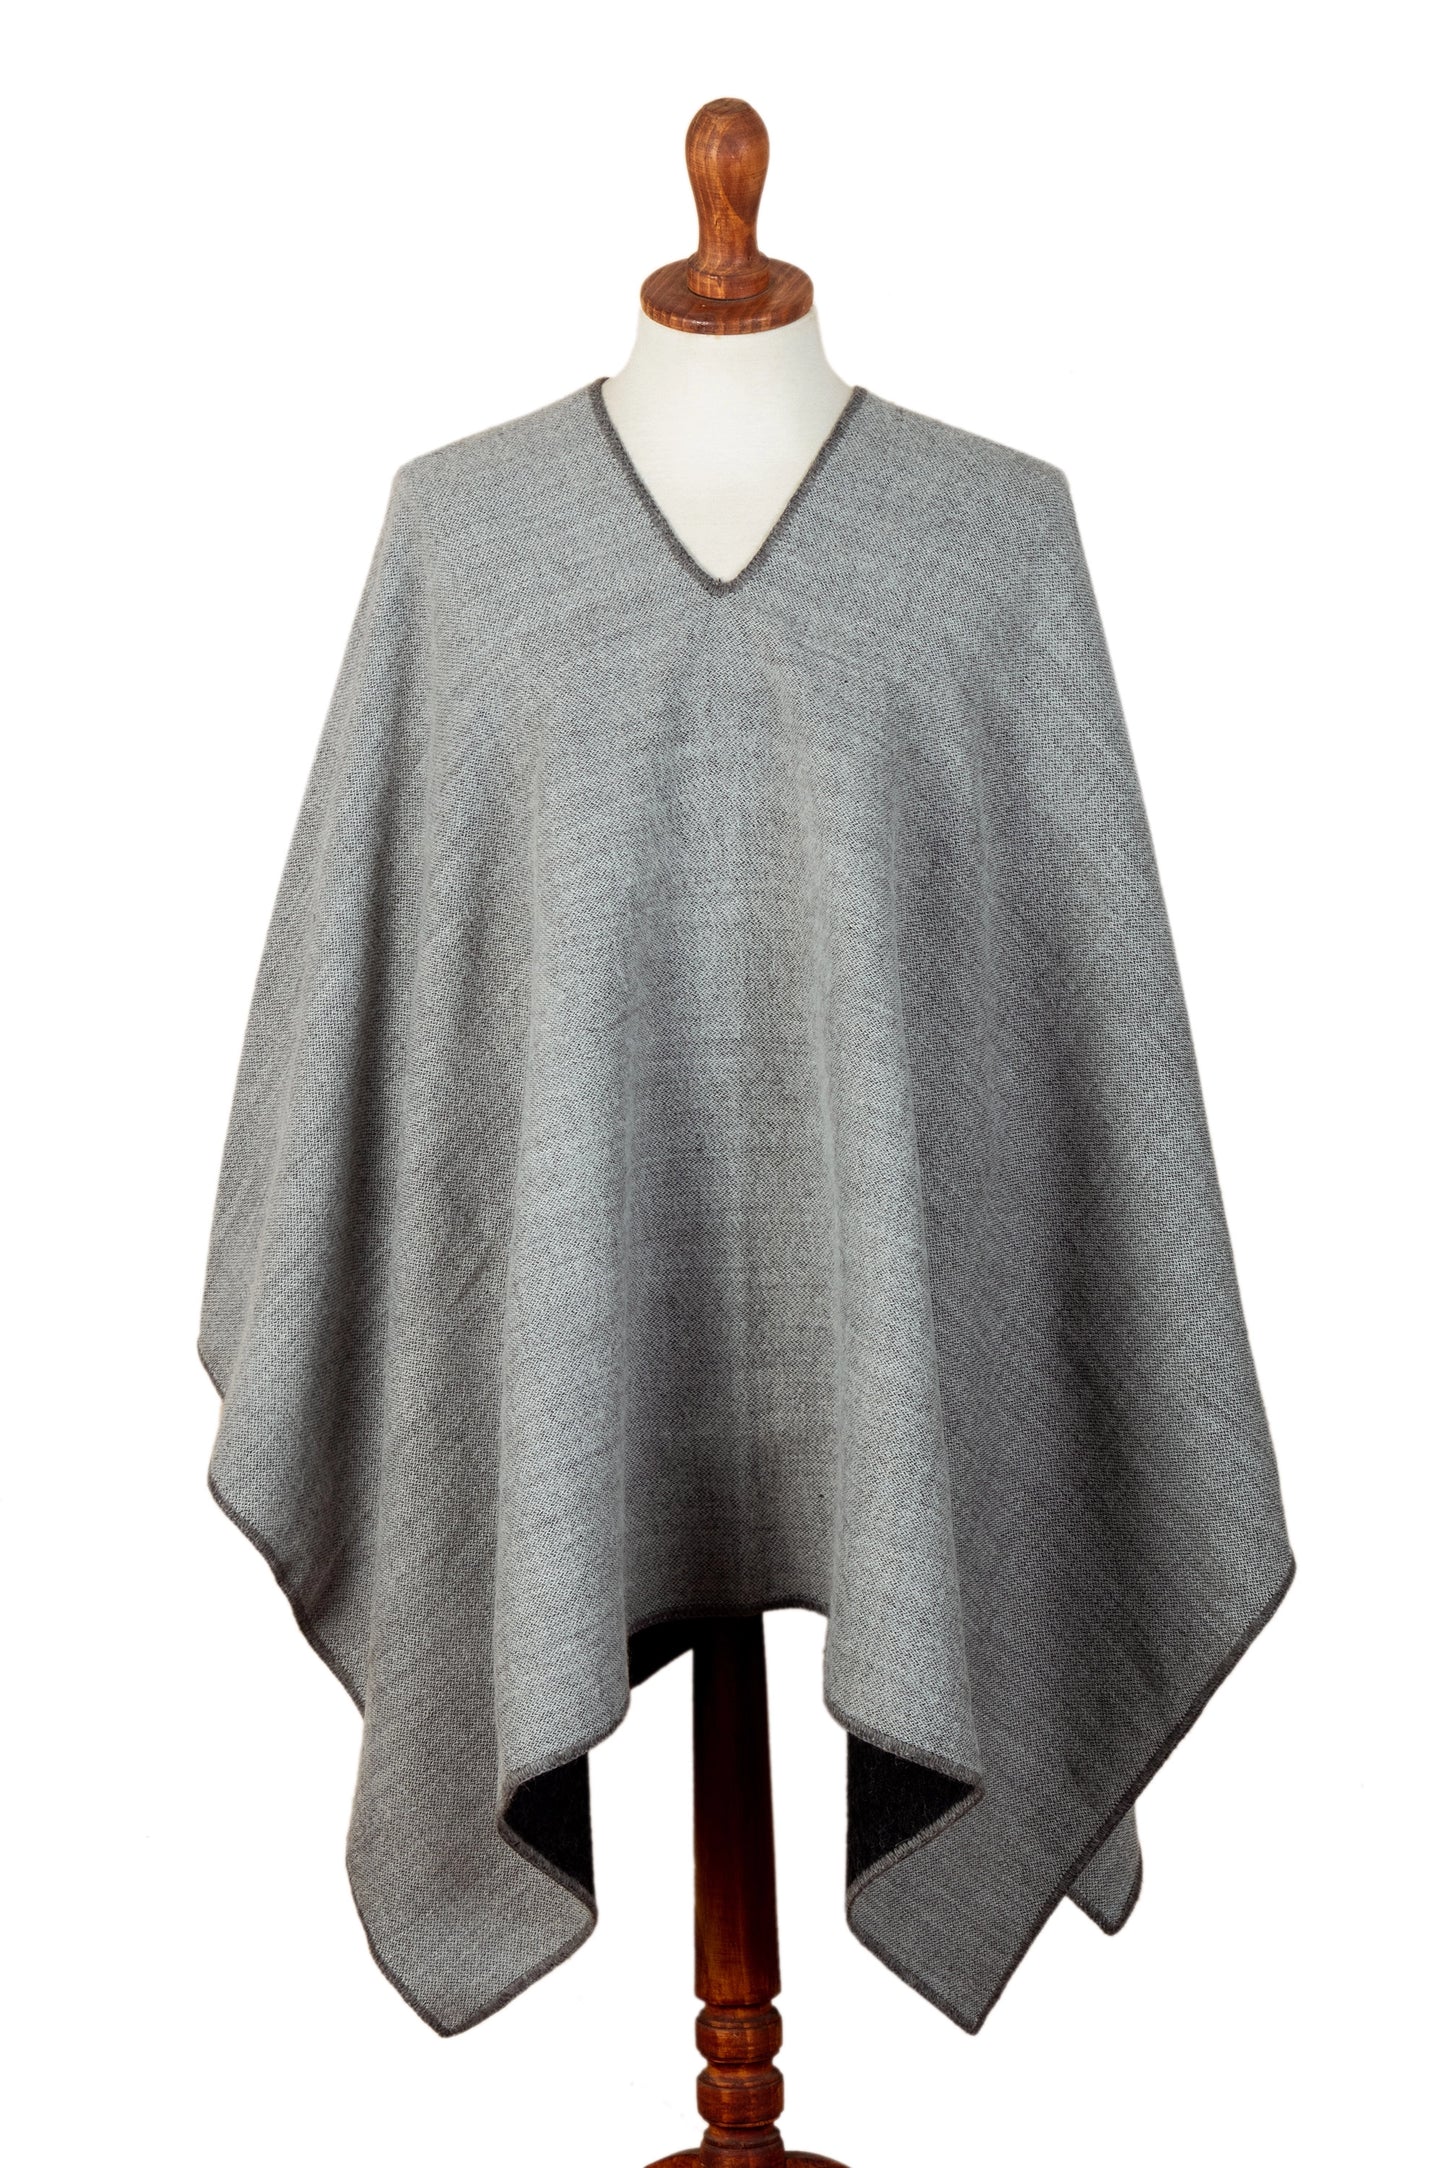 Andean Duality - Alpaca Blend Reversible Poncho in Grey and Black